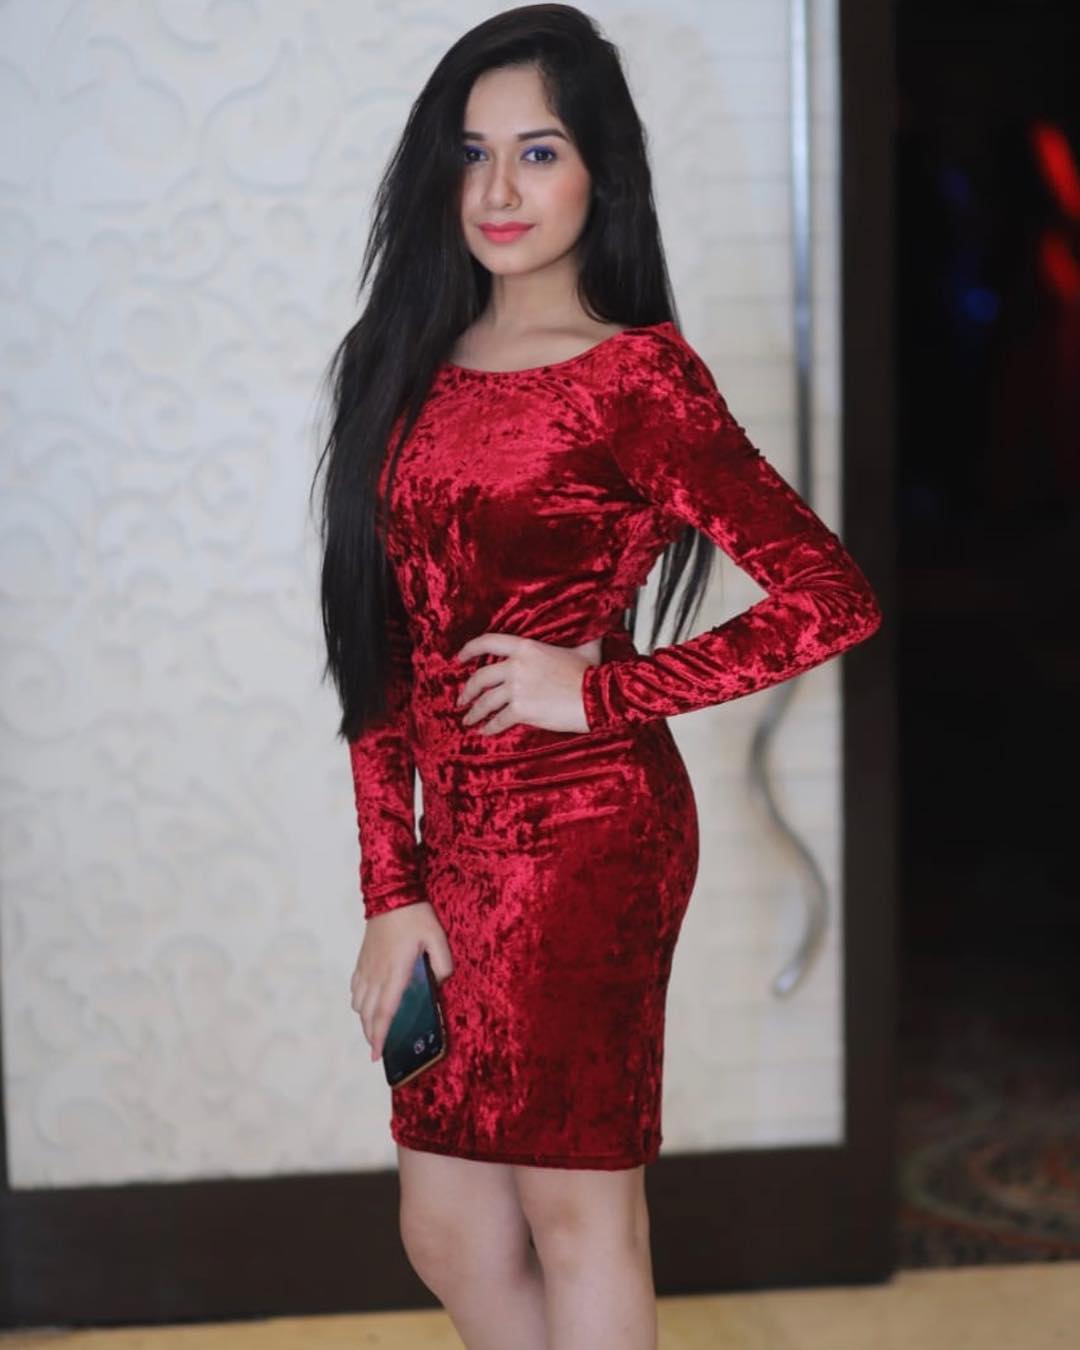 8. Ishq Farzi actress looks gorgeous in Red dress